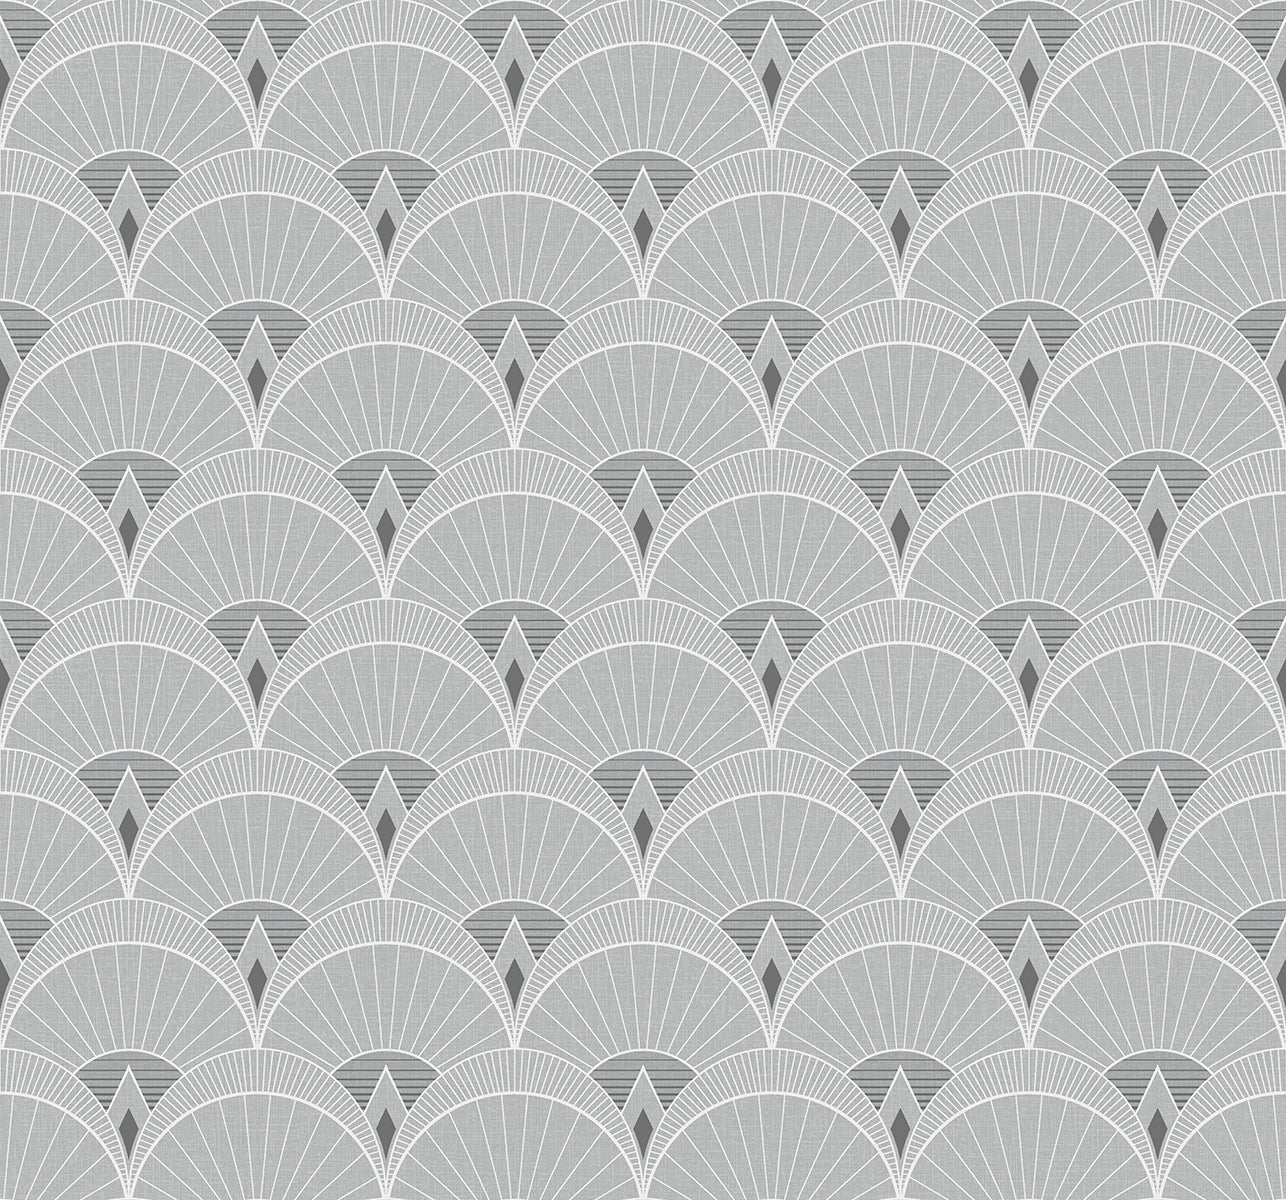 DC60305 | Chrysler Arches, Grey - Collins & Company Wallpaper